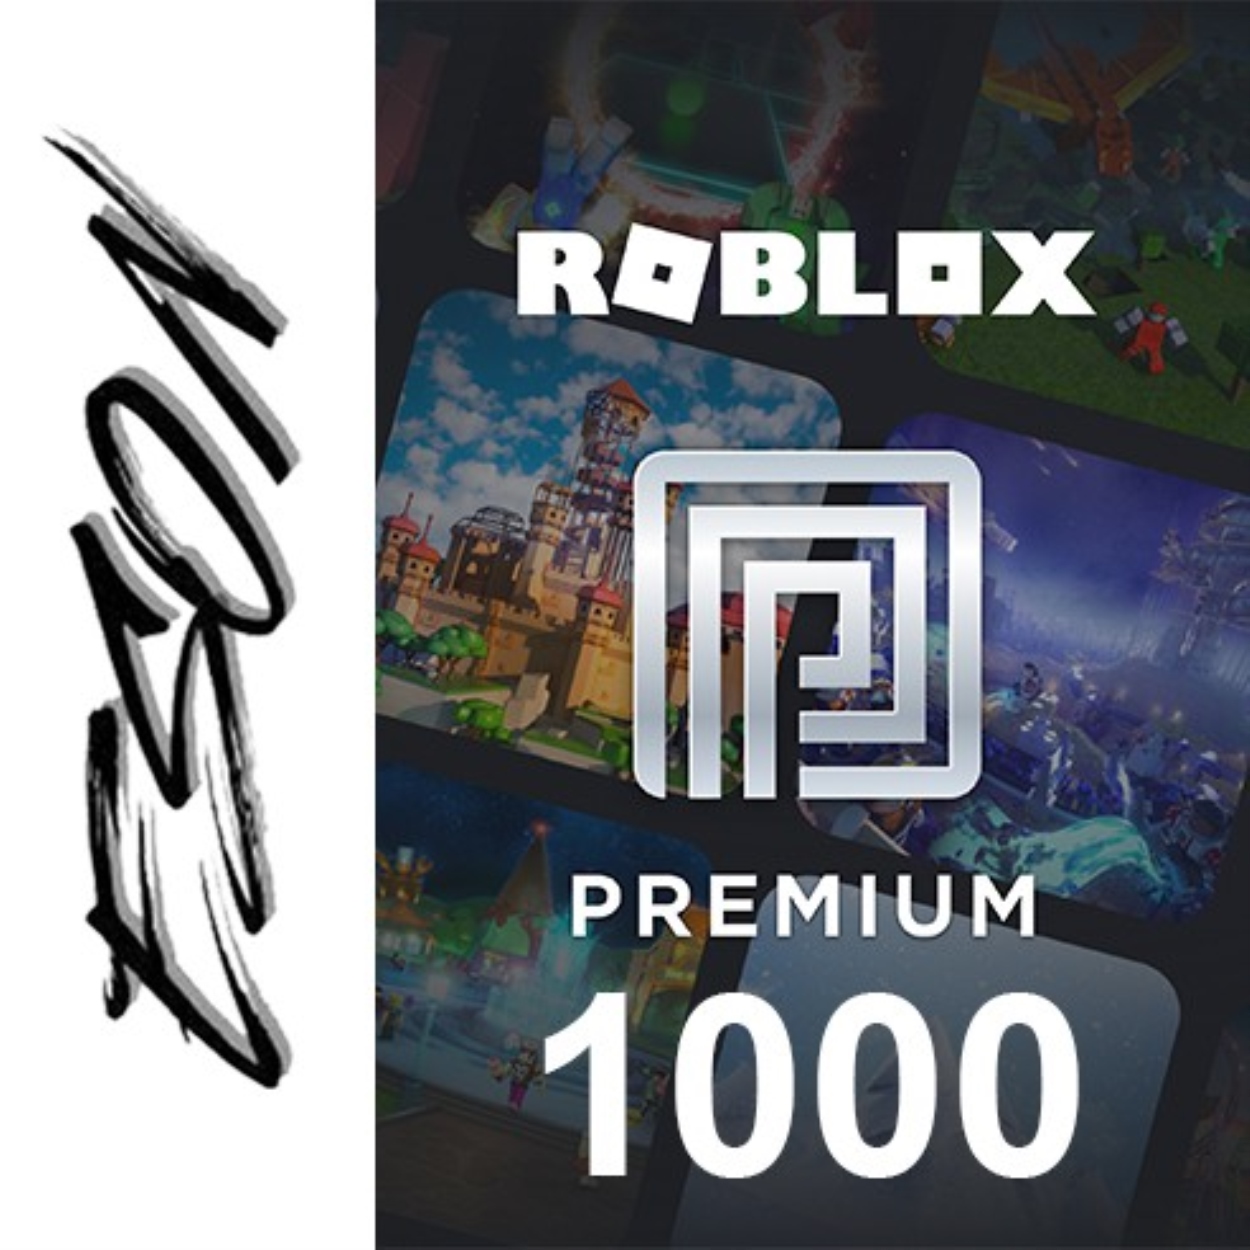 Buy Robux Shop Buy Robux With Great Discounts And Prices Online Lazada Philippines - where can i buy robux in philippines